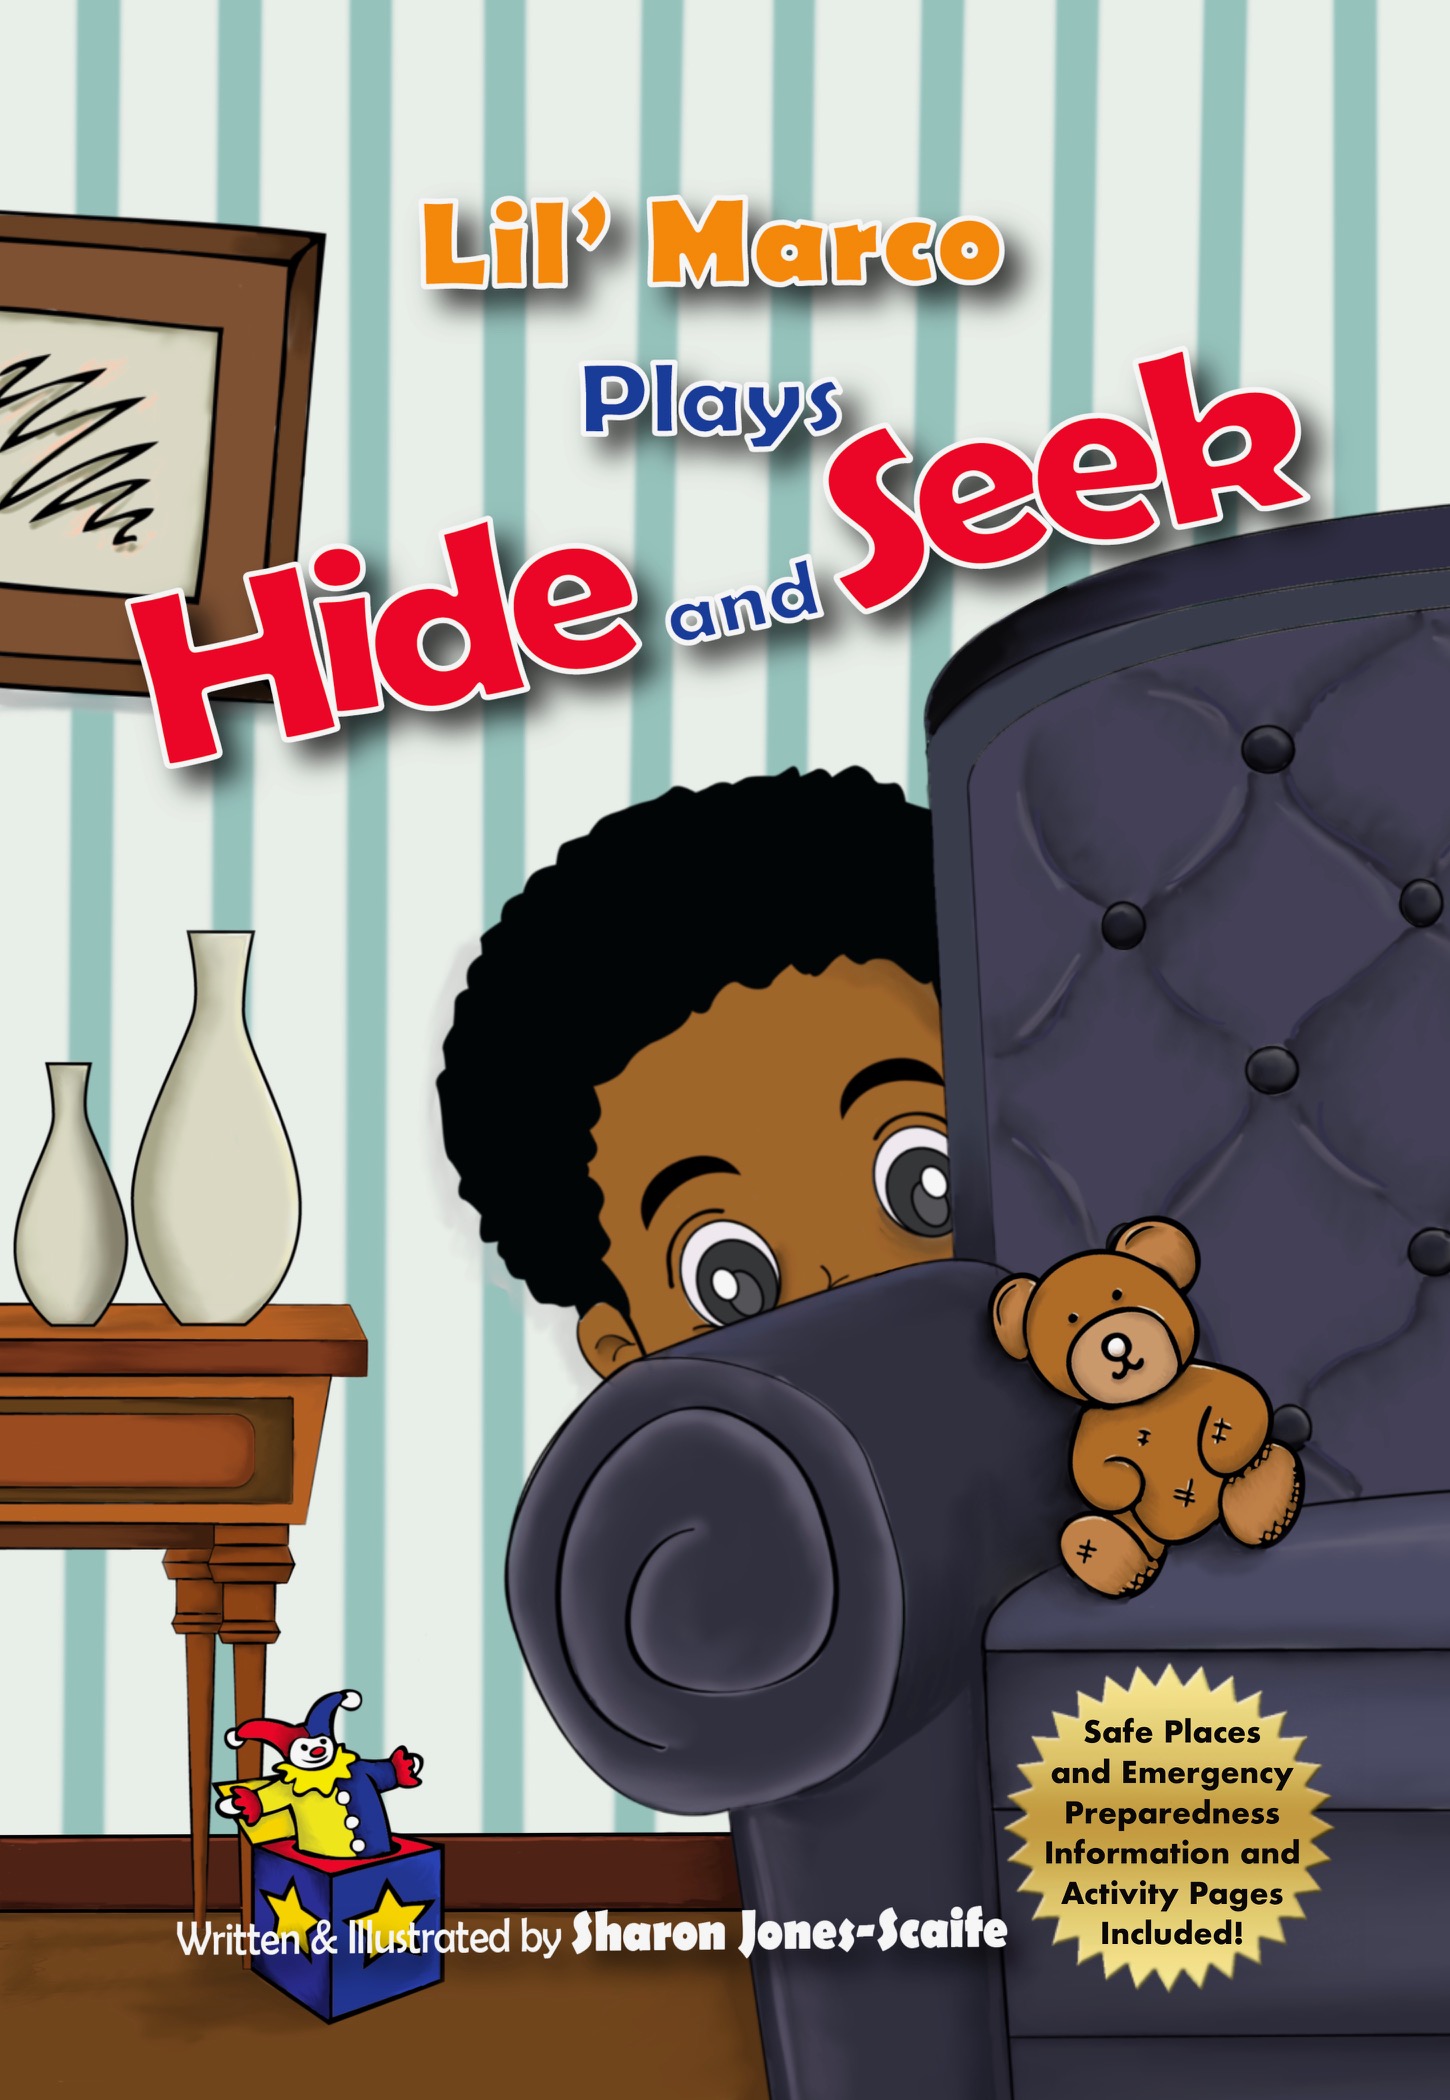 Author/Illustrator Sharon Jones-Scaife Announces Children’s Book Release, “Lil’ Marco Plays Hide and Seek”